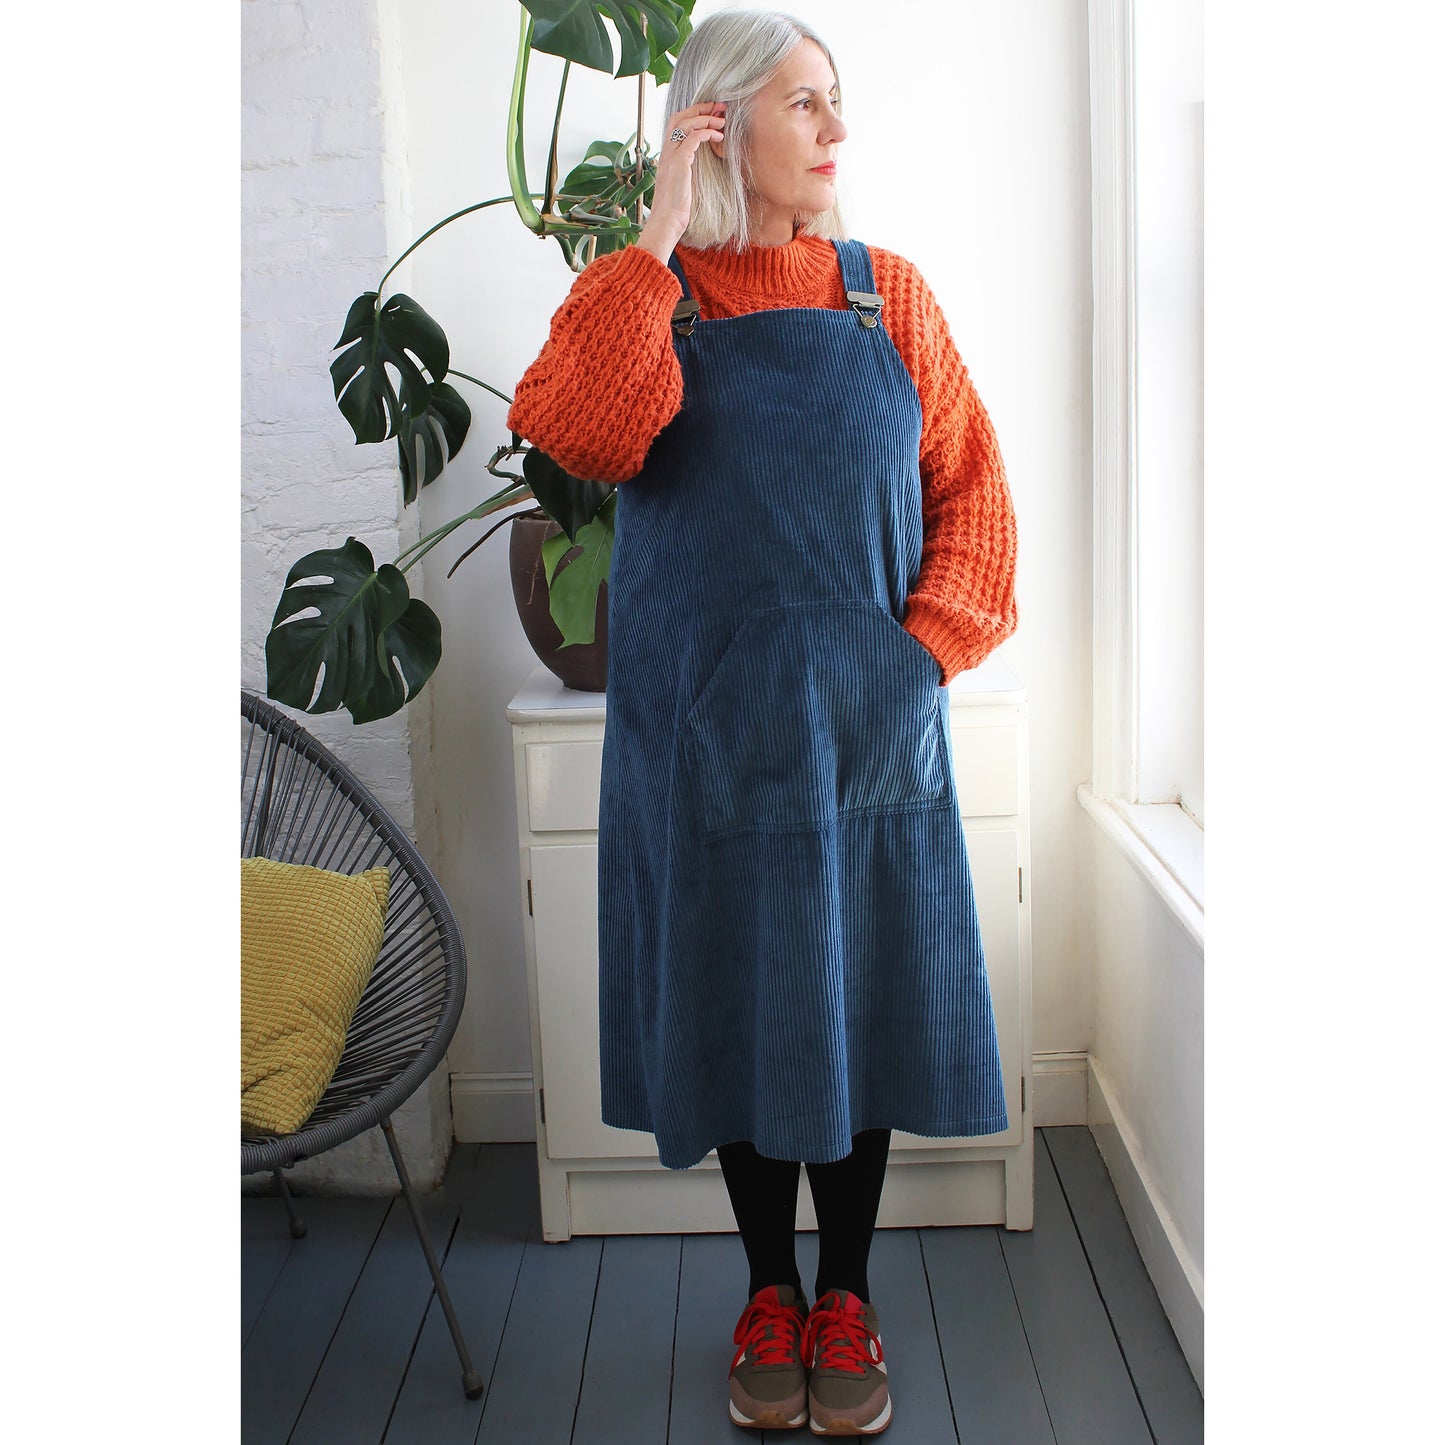 MILDRED PINAFORE sewing pattern